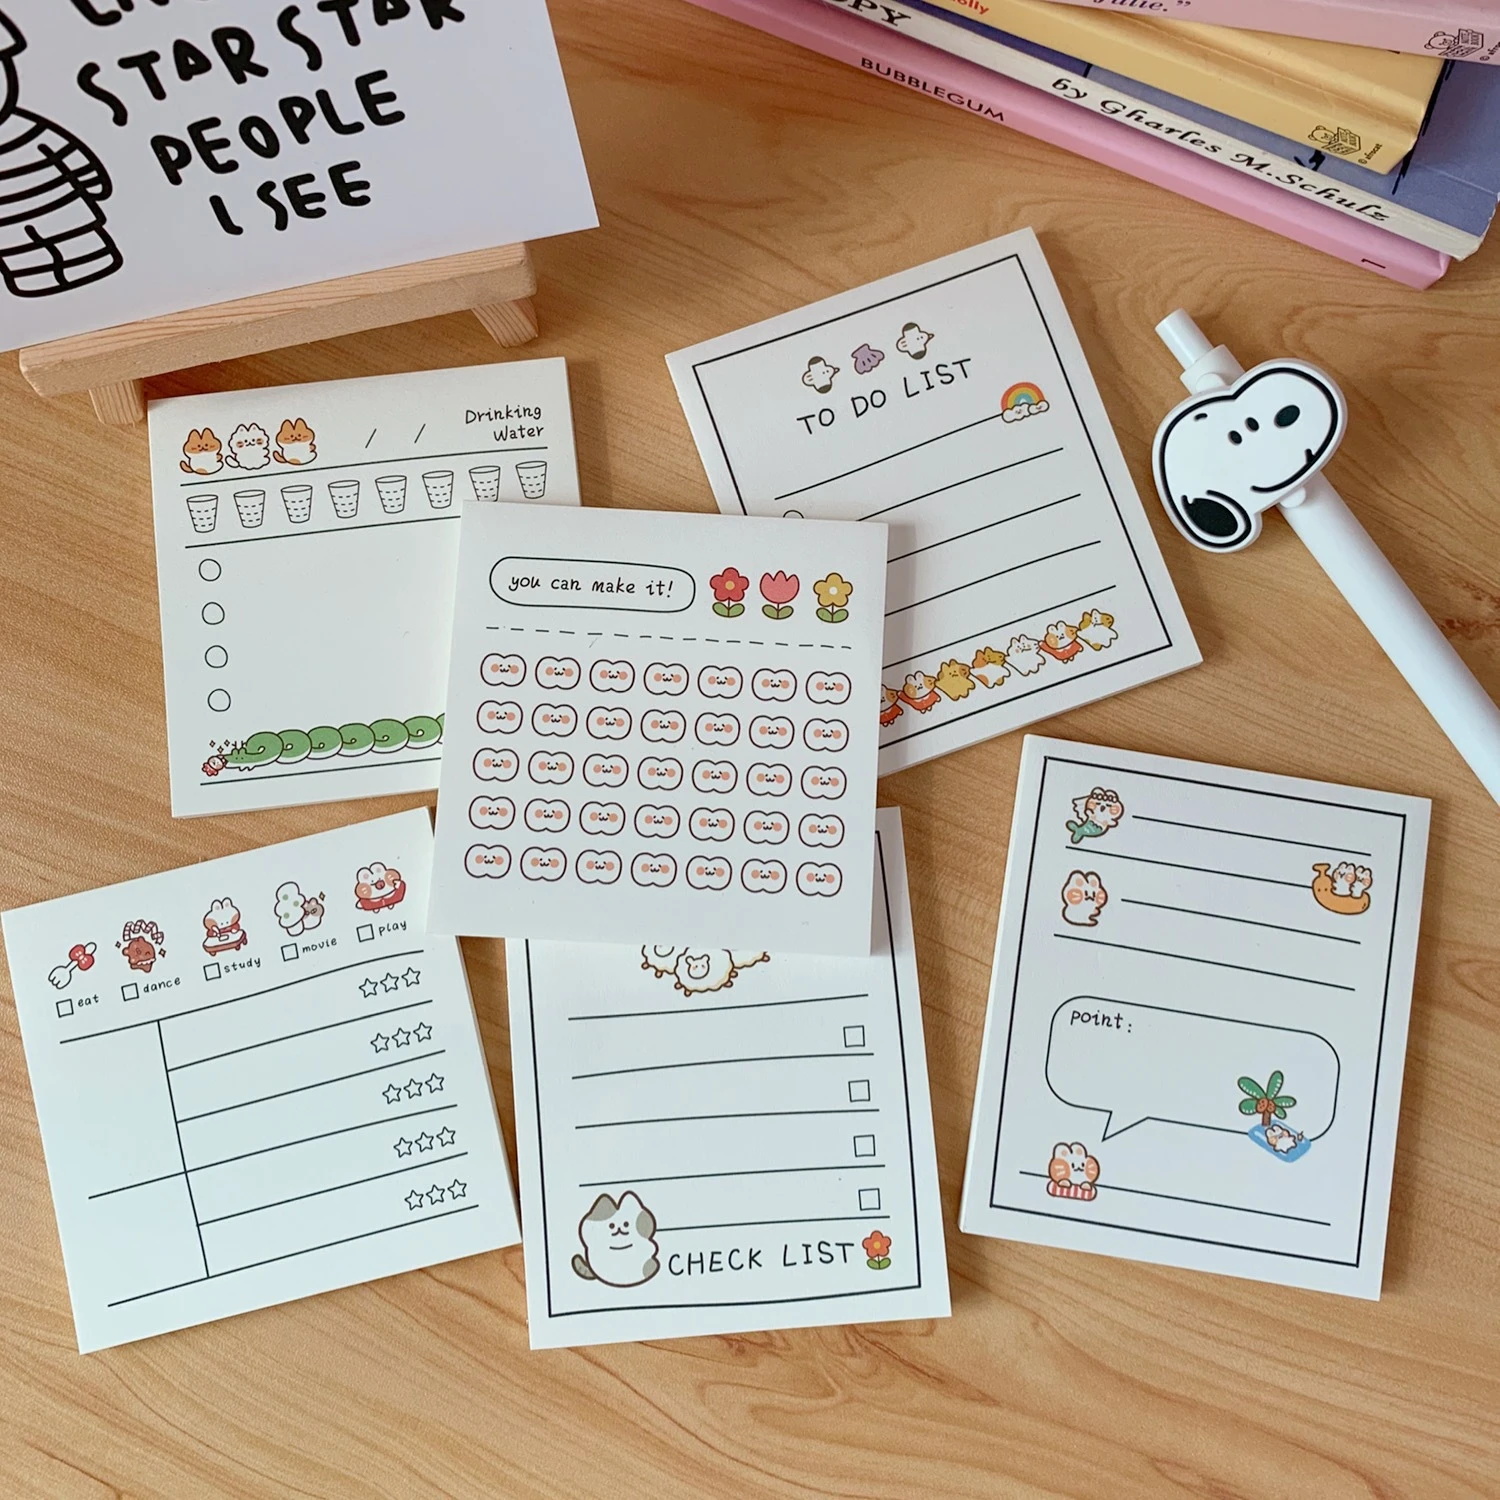 2020 New Cute Memo Pad Cartoon To do List Monthly Plan Kawaii Sticky Notes  Notepads Stationery School Office Supplies|Giấy Dán Nhớ| - AliExpress